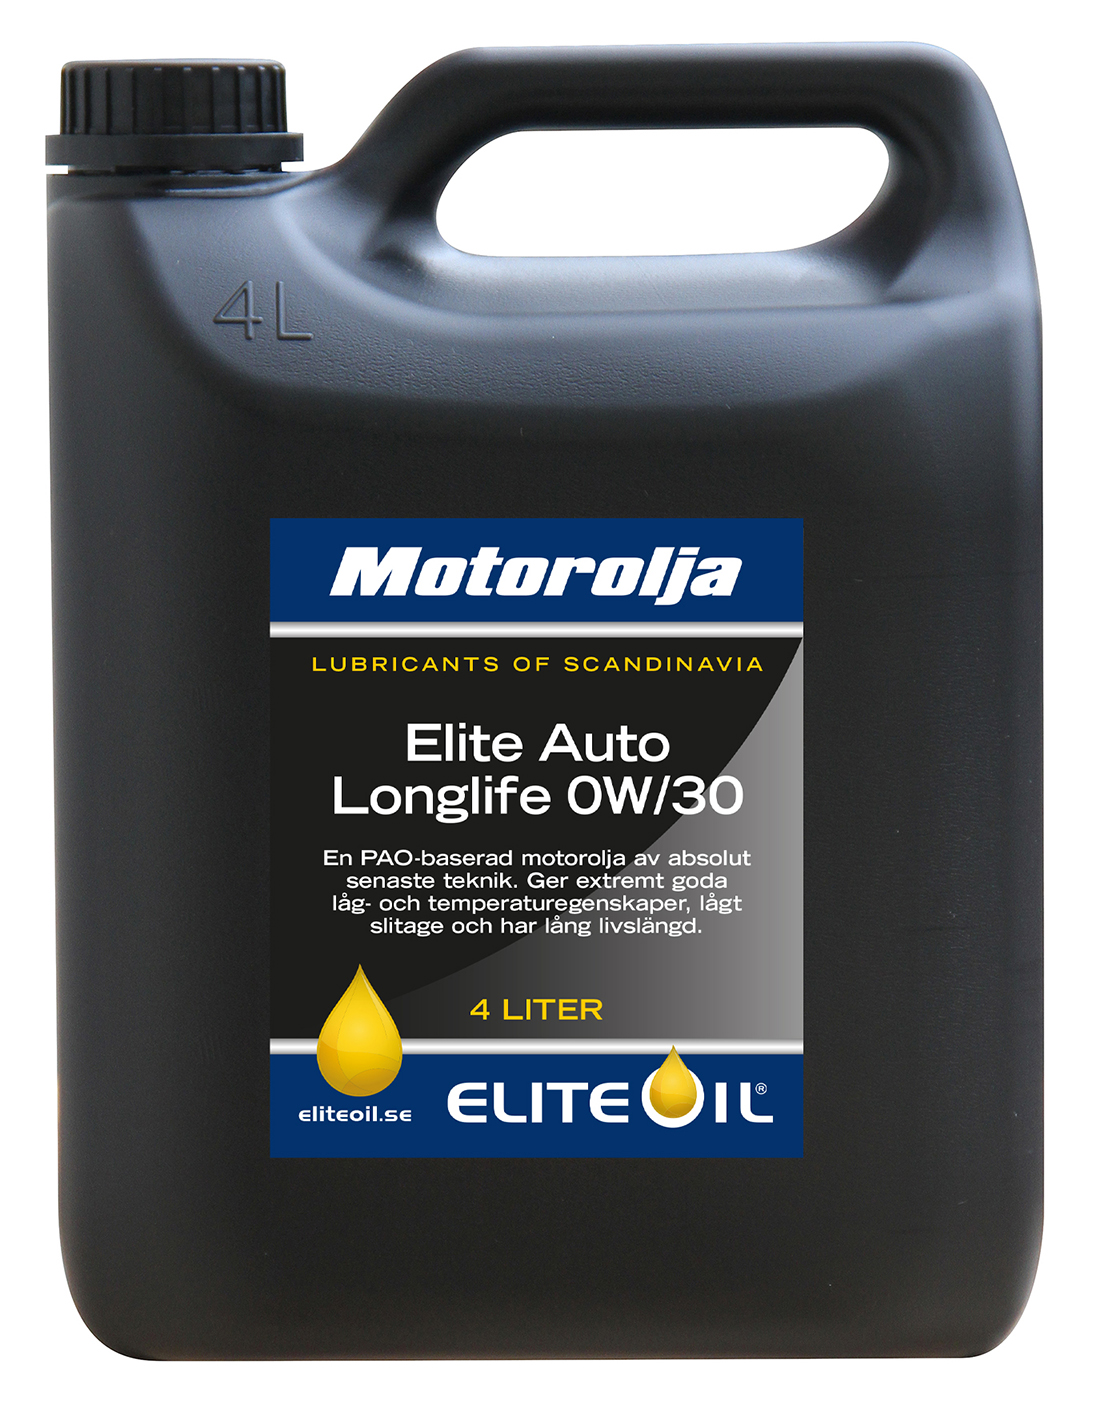 Elite Auto Longlife, 0W/30, 4 liter dunk (3-pack) - 3 pack-image